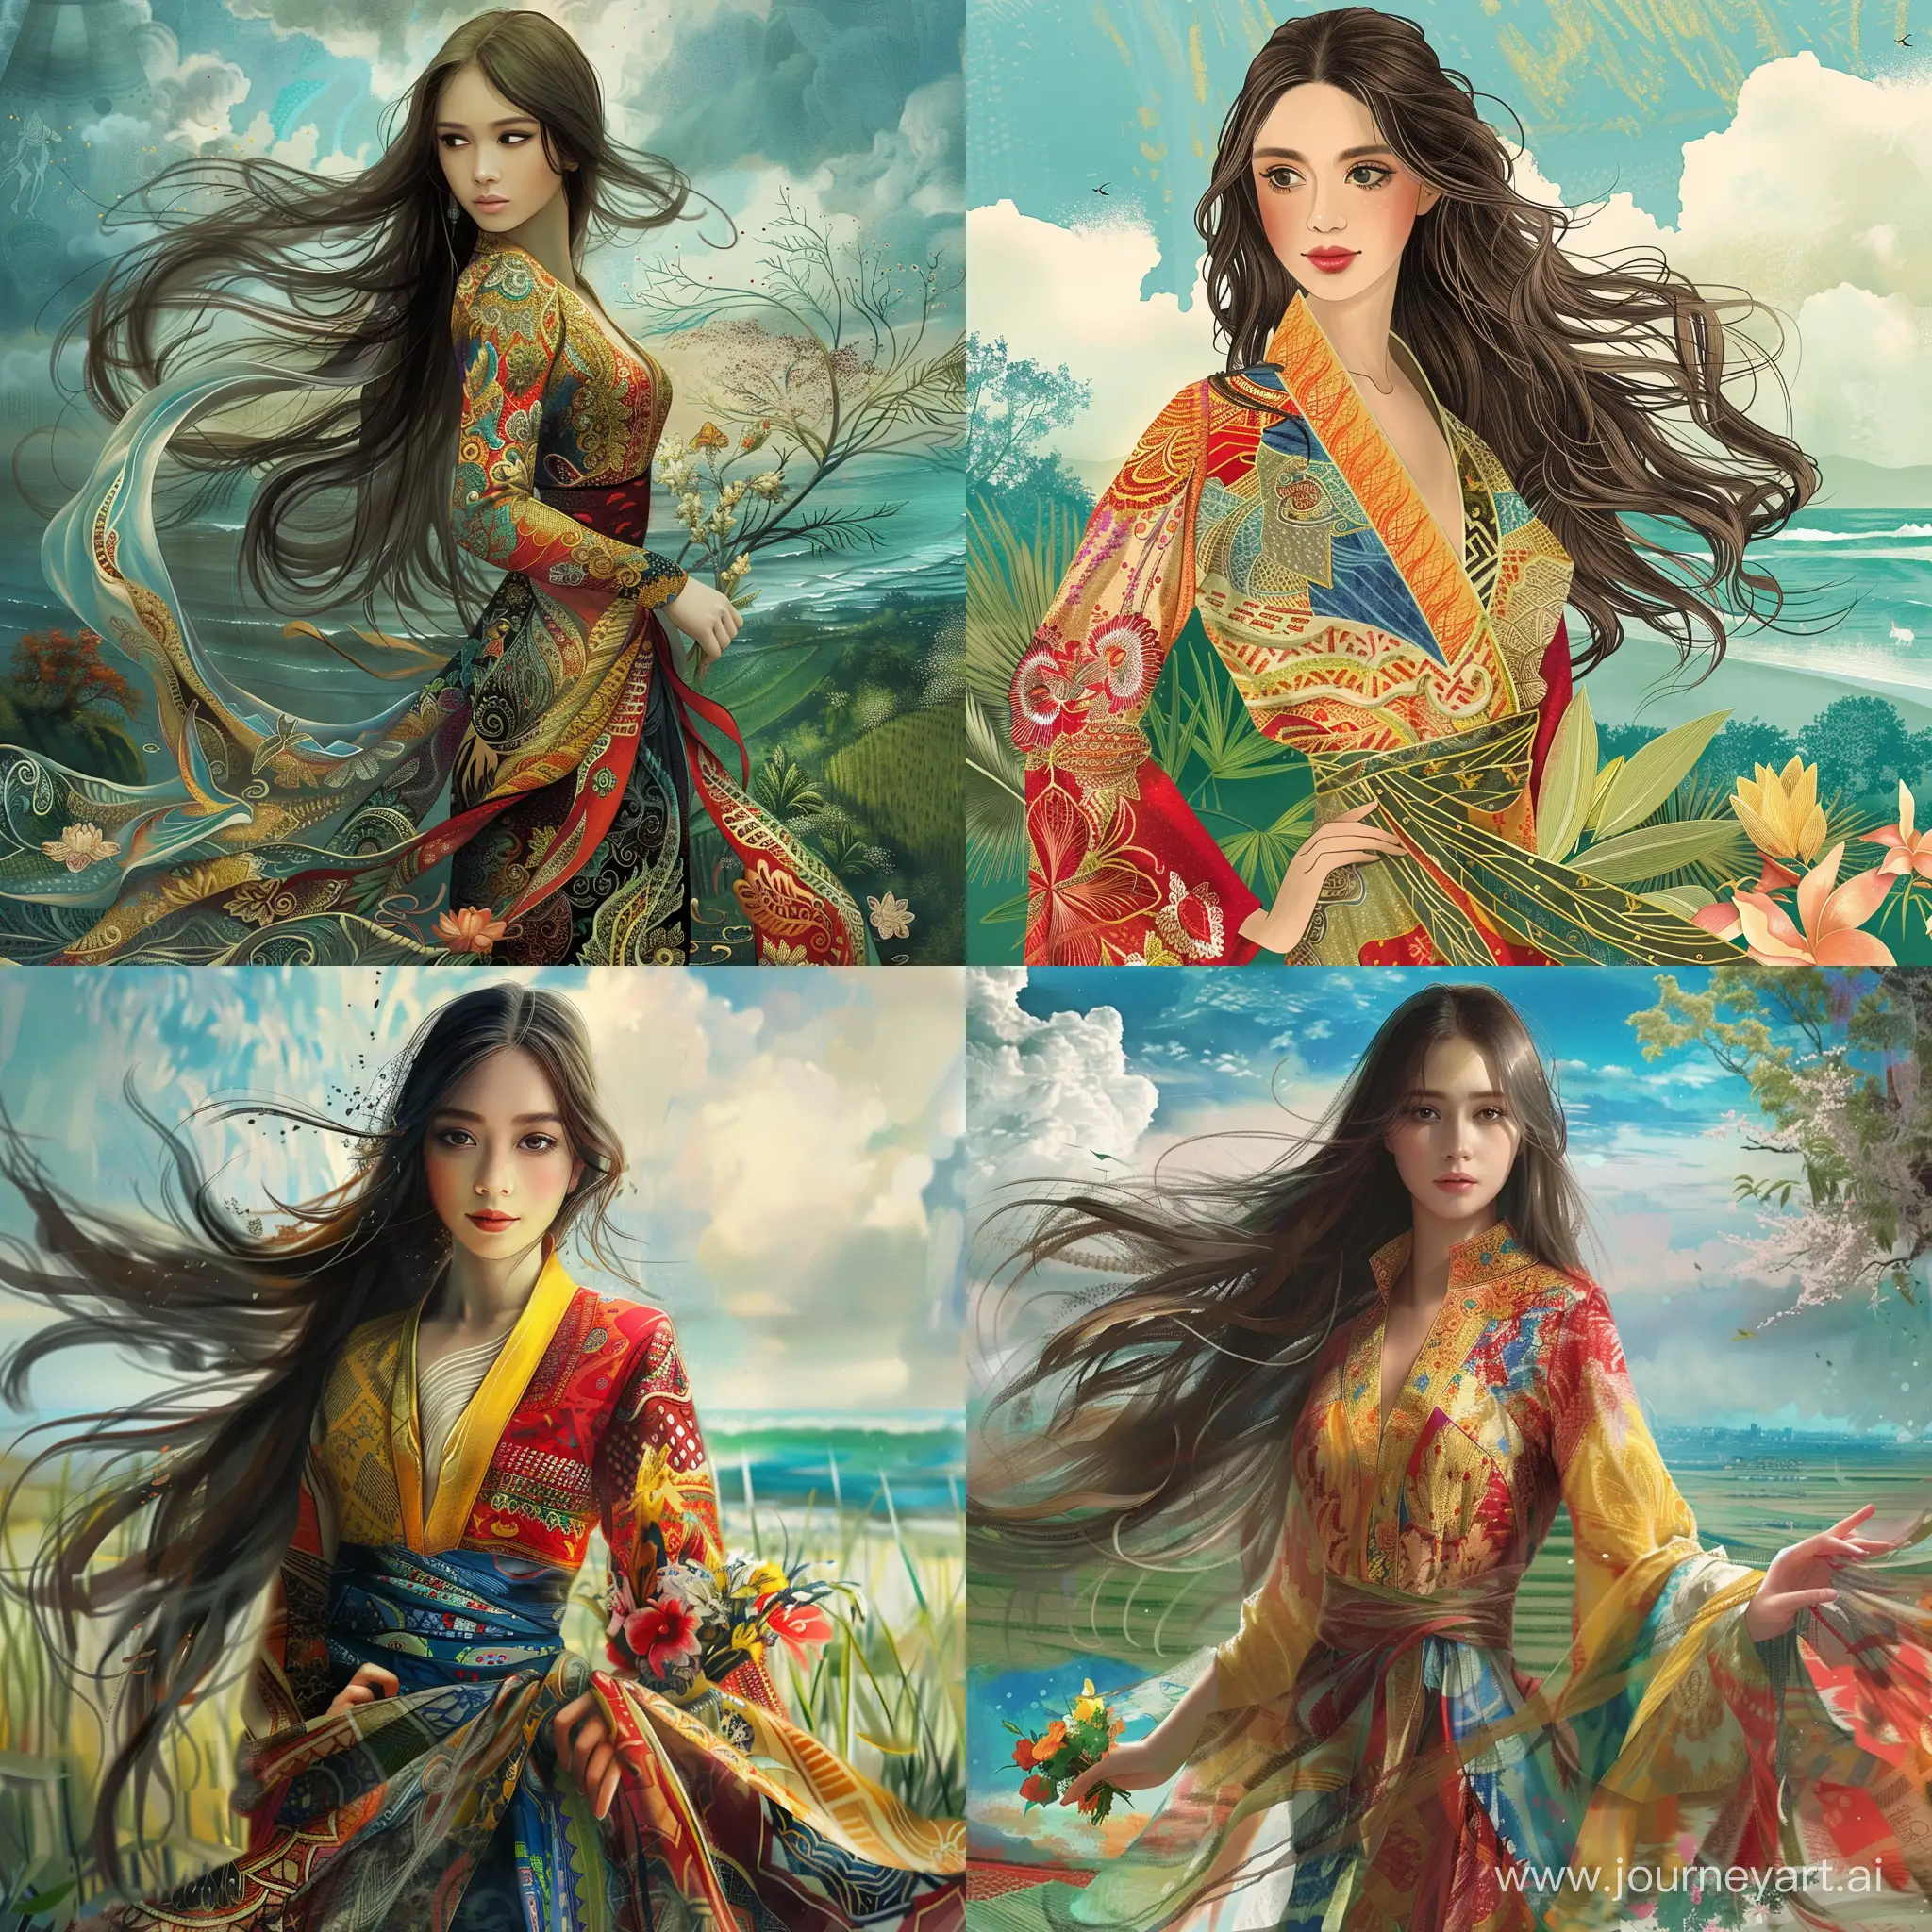 Graceful-Indonesian-Woman-in-Vibrant-Batik-Clothing-against-Scenic-Background